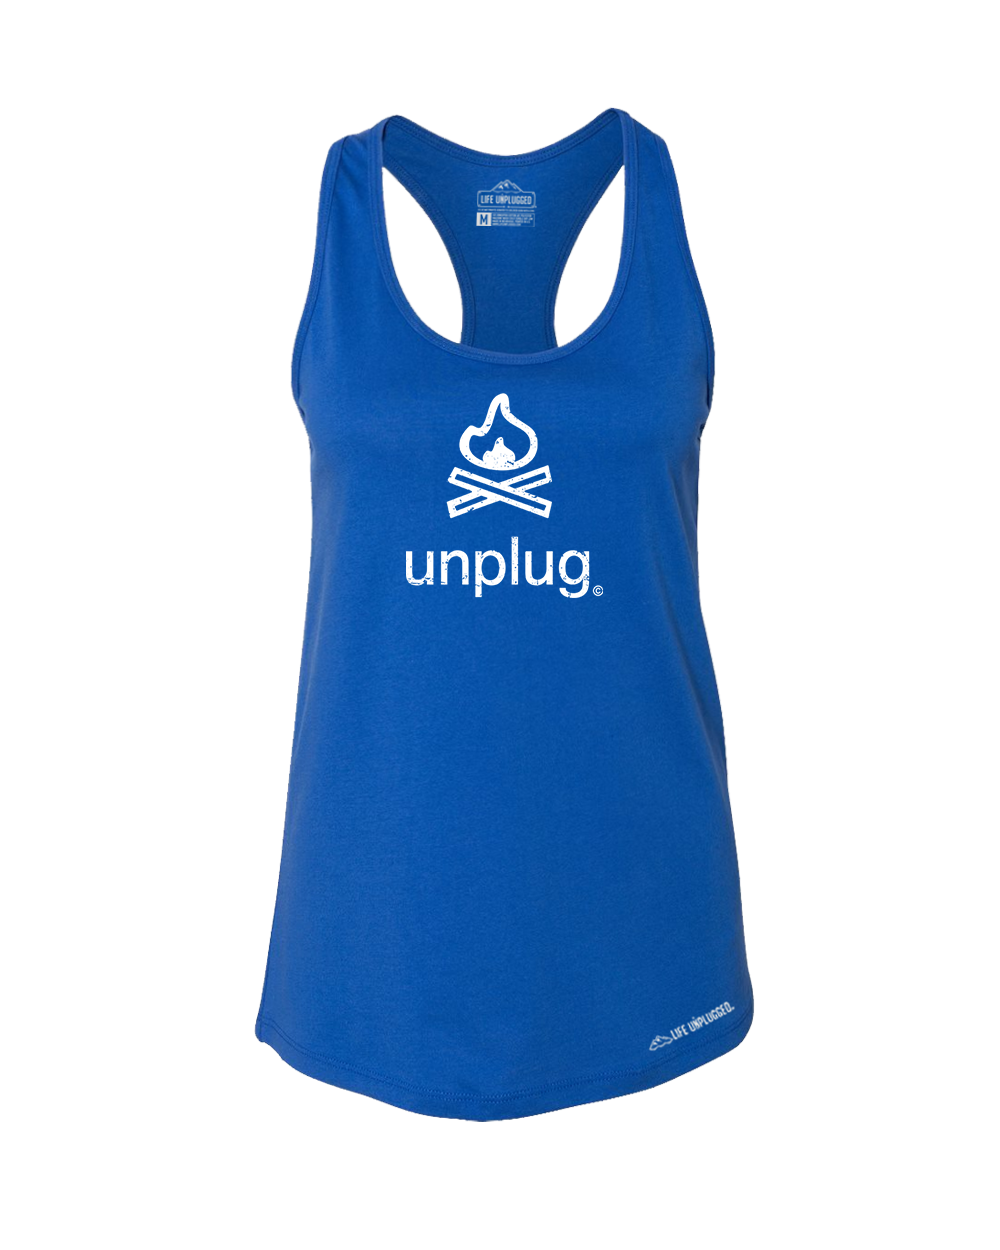 Campfire Premium Women's Relaxed Fit Racerback Tank Top - Life Unplugged